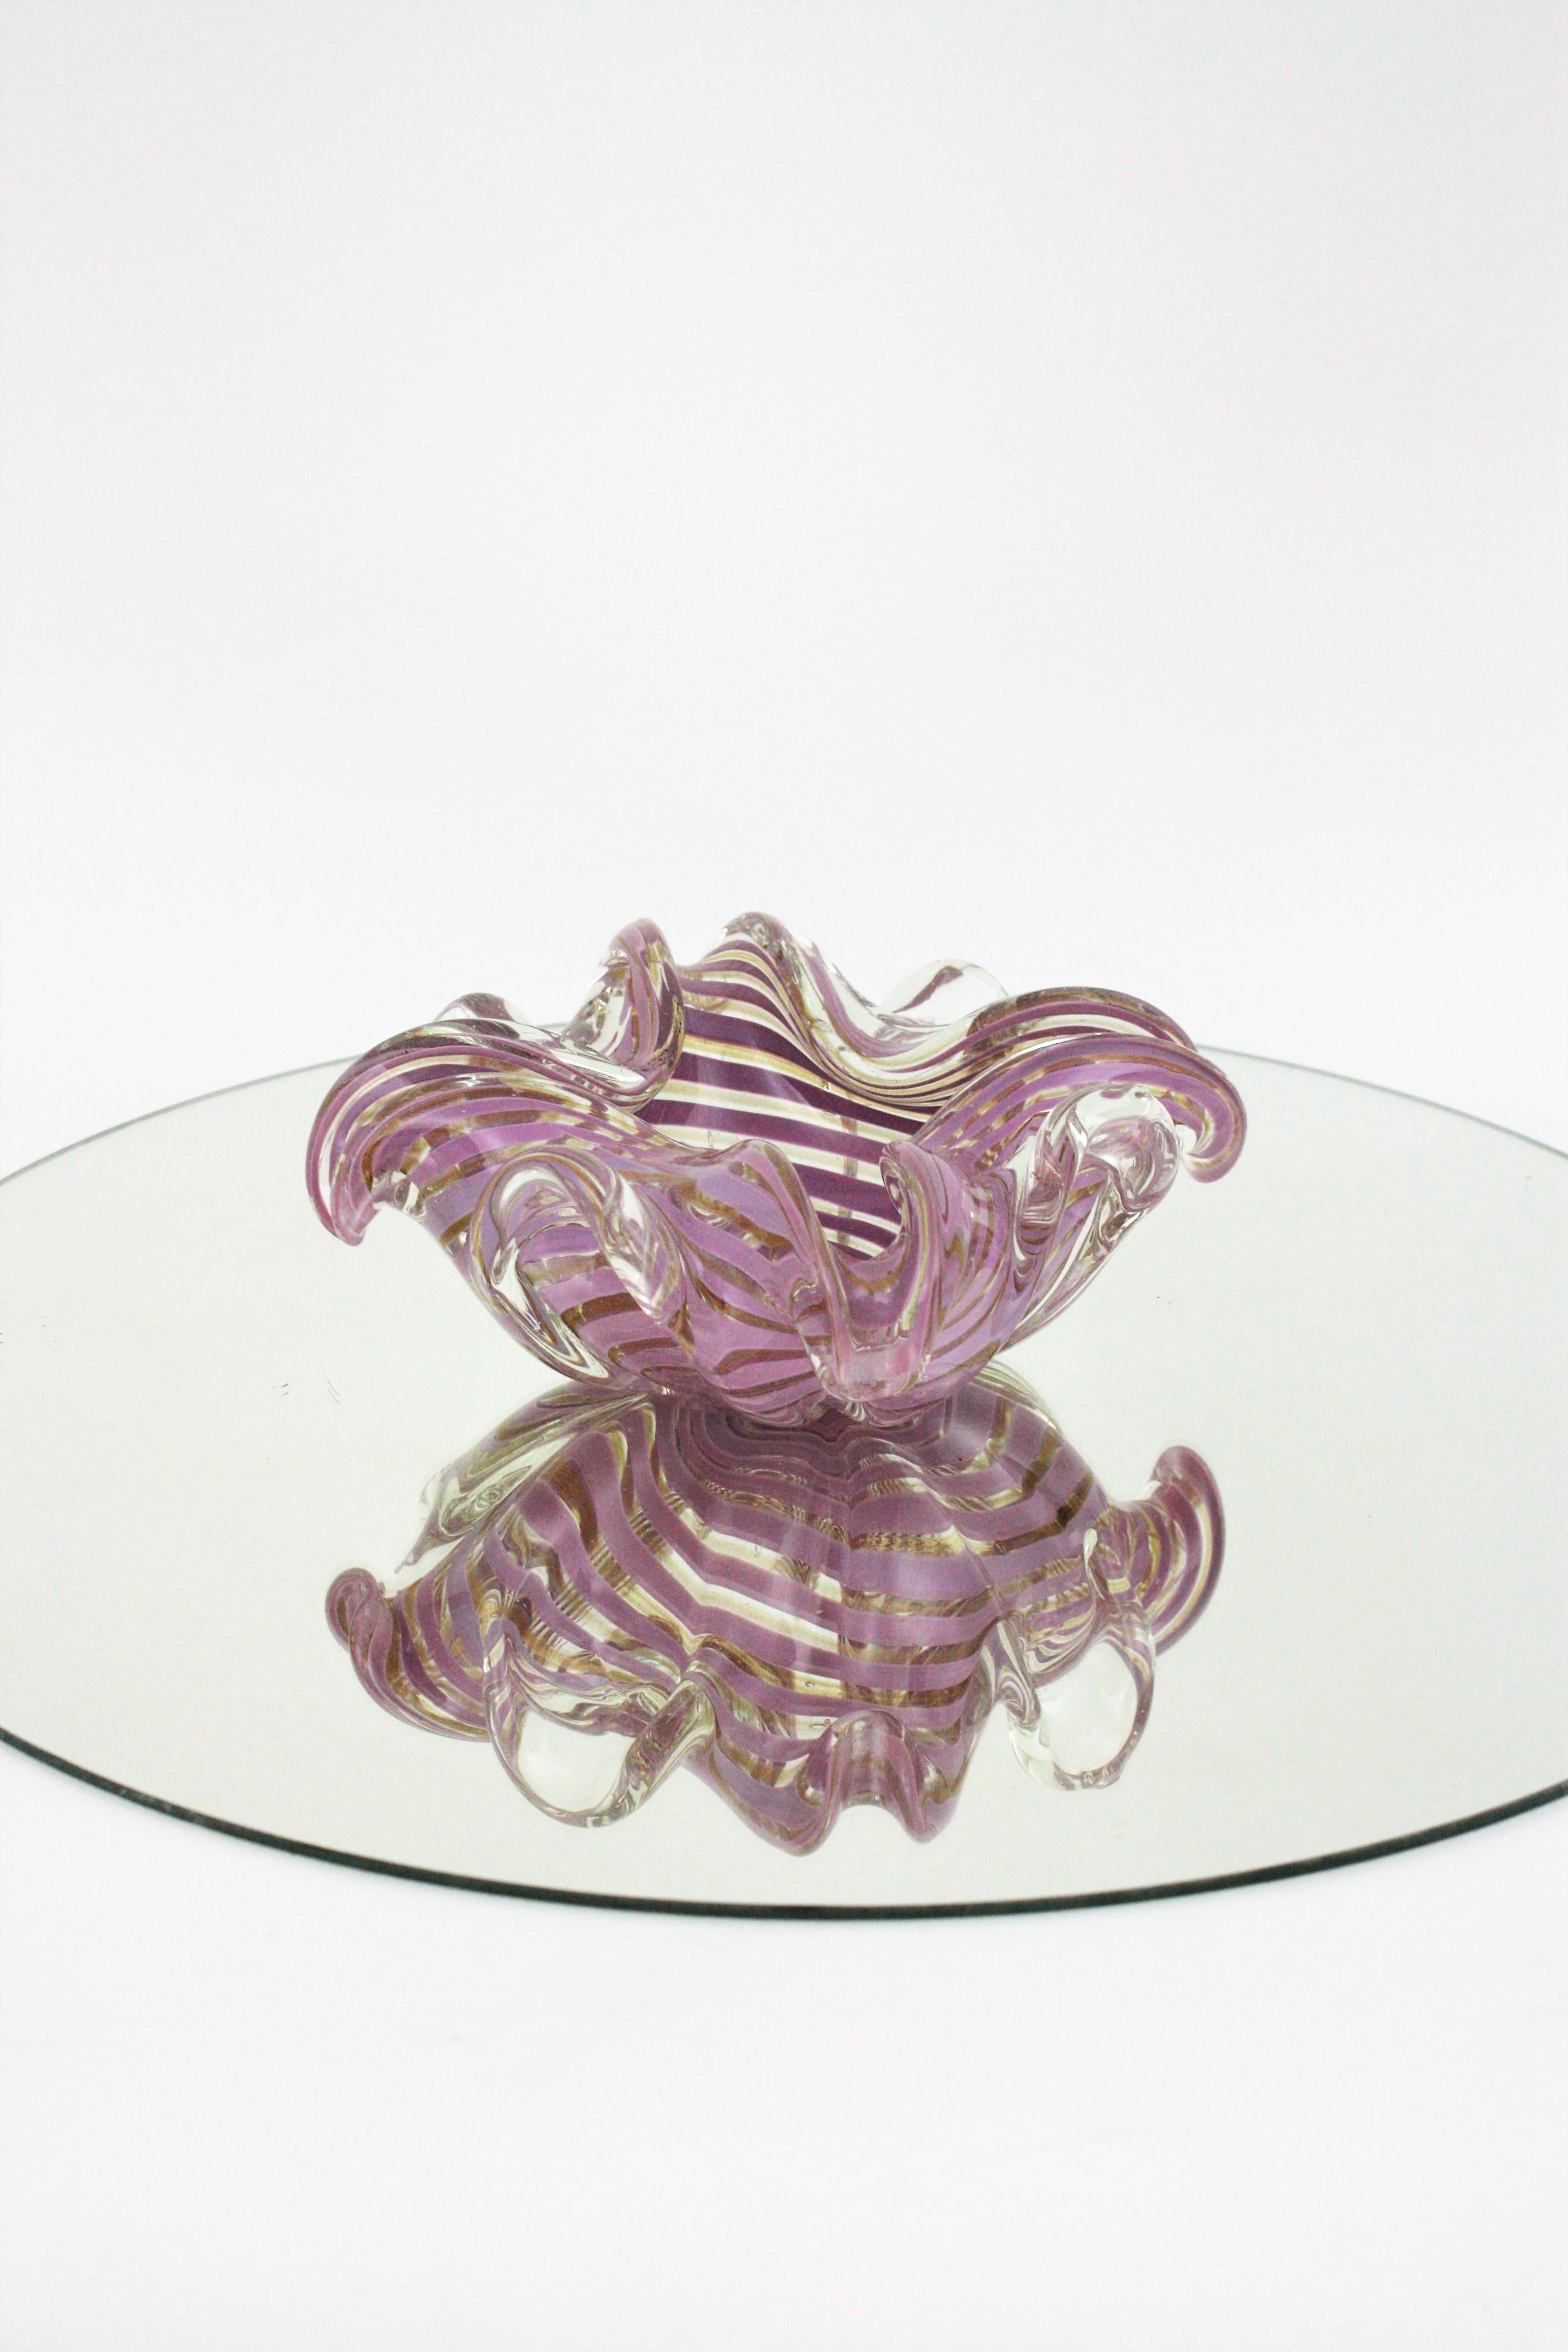 Fratelli Toso Murano Glass Lilac Swirl Ribbons & Gold Dust Large Bowl / Ashtray In Good Condition For Sale In Barcelona, ES